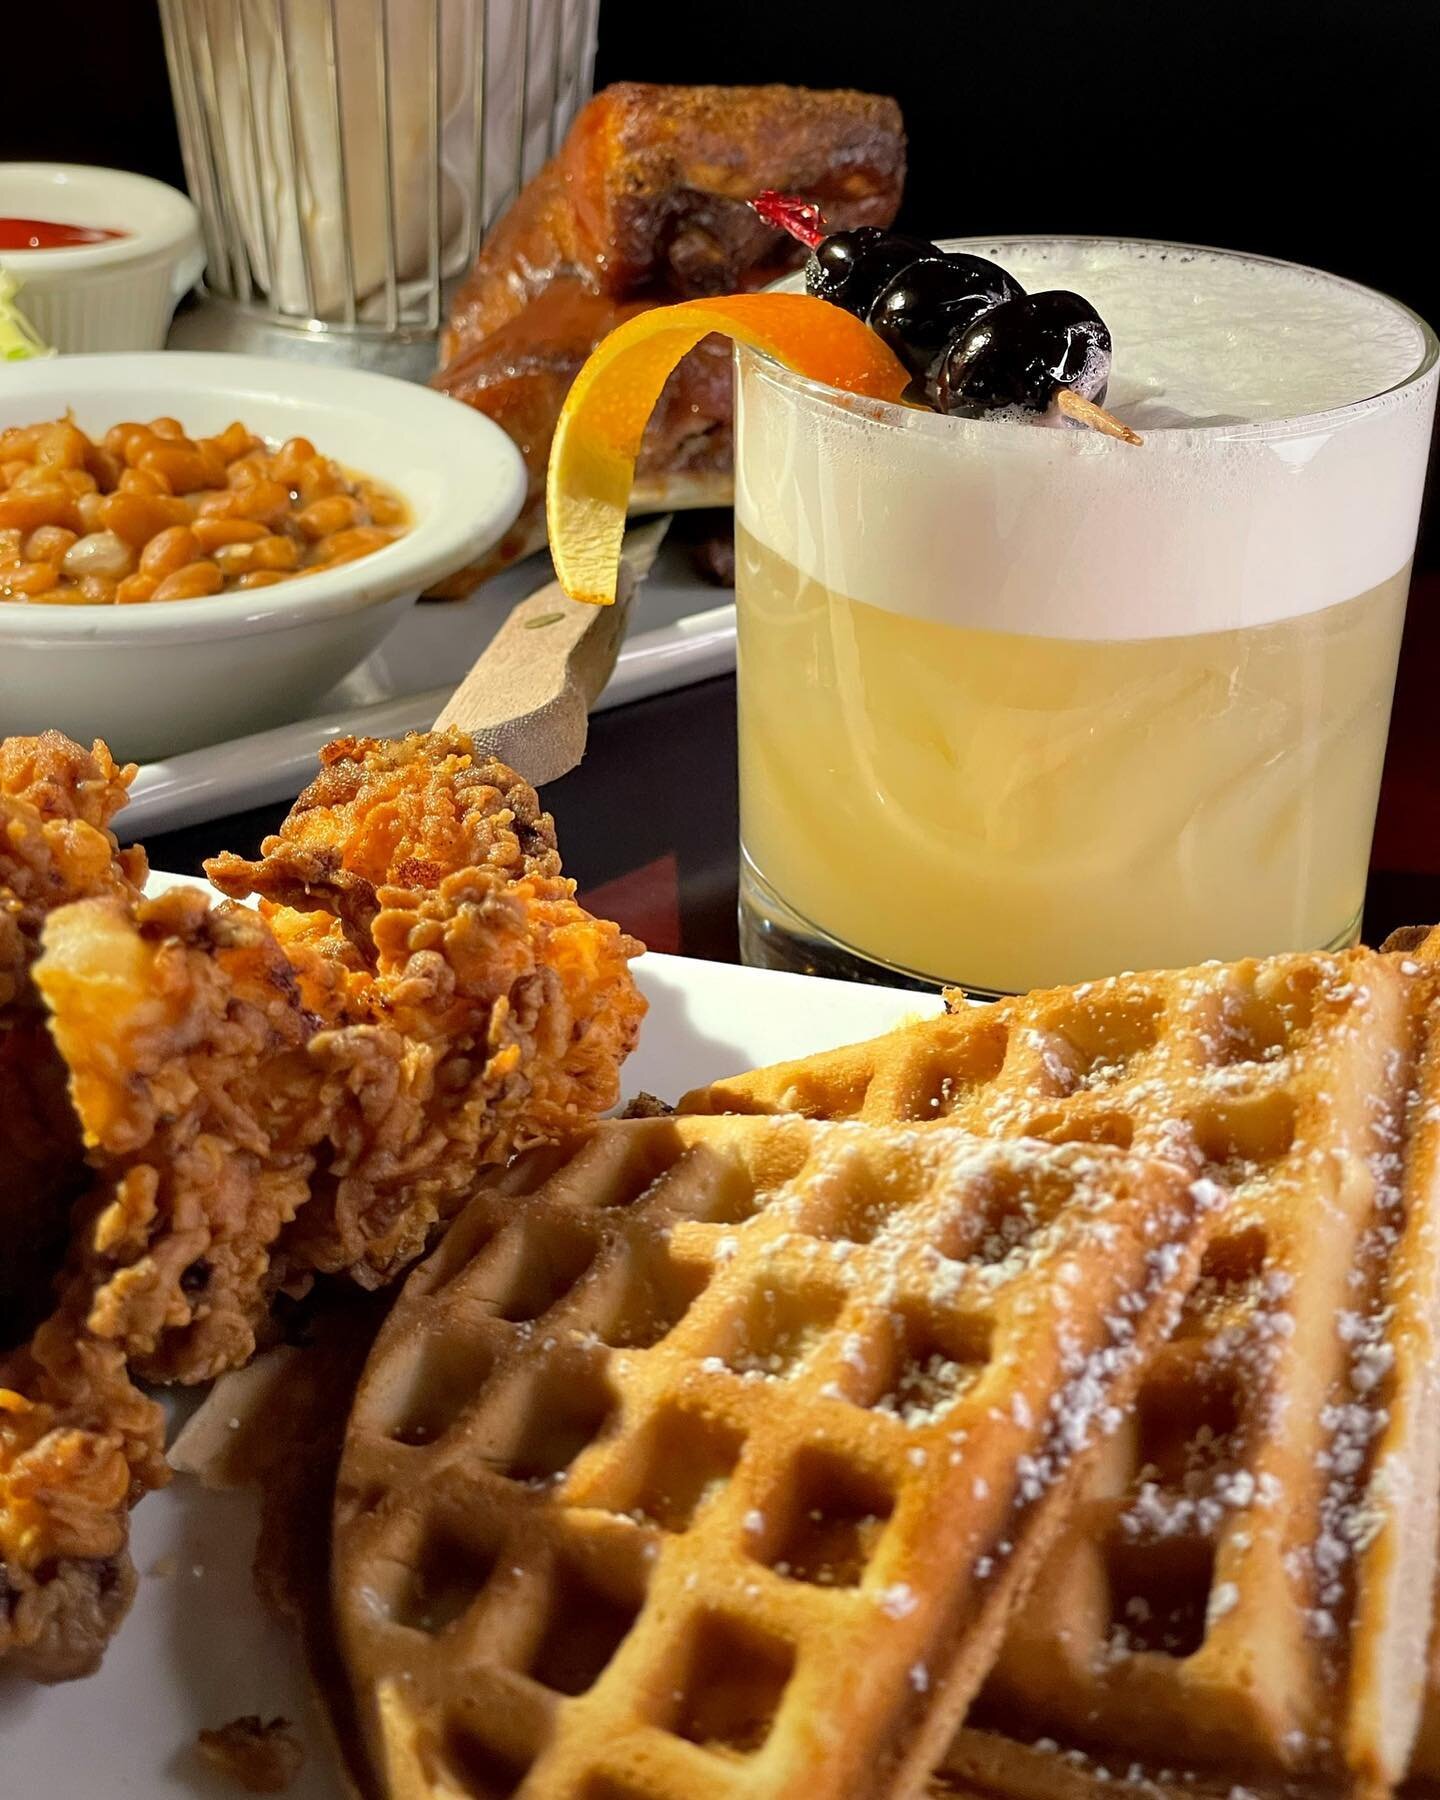 Weekends were made for brunching! Come in today to try our delicious Chicken and Waffles😍🥳🥂 #engineco28 #enginecono28 #dtla #dtlarestaurant #dtlafoodie #brunch #chickenandwaffles